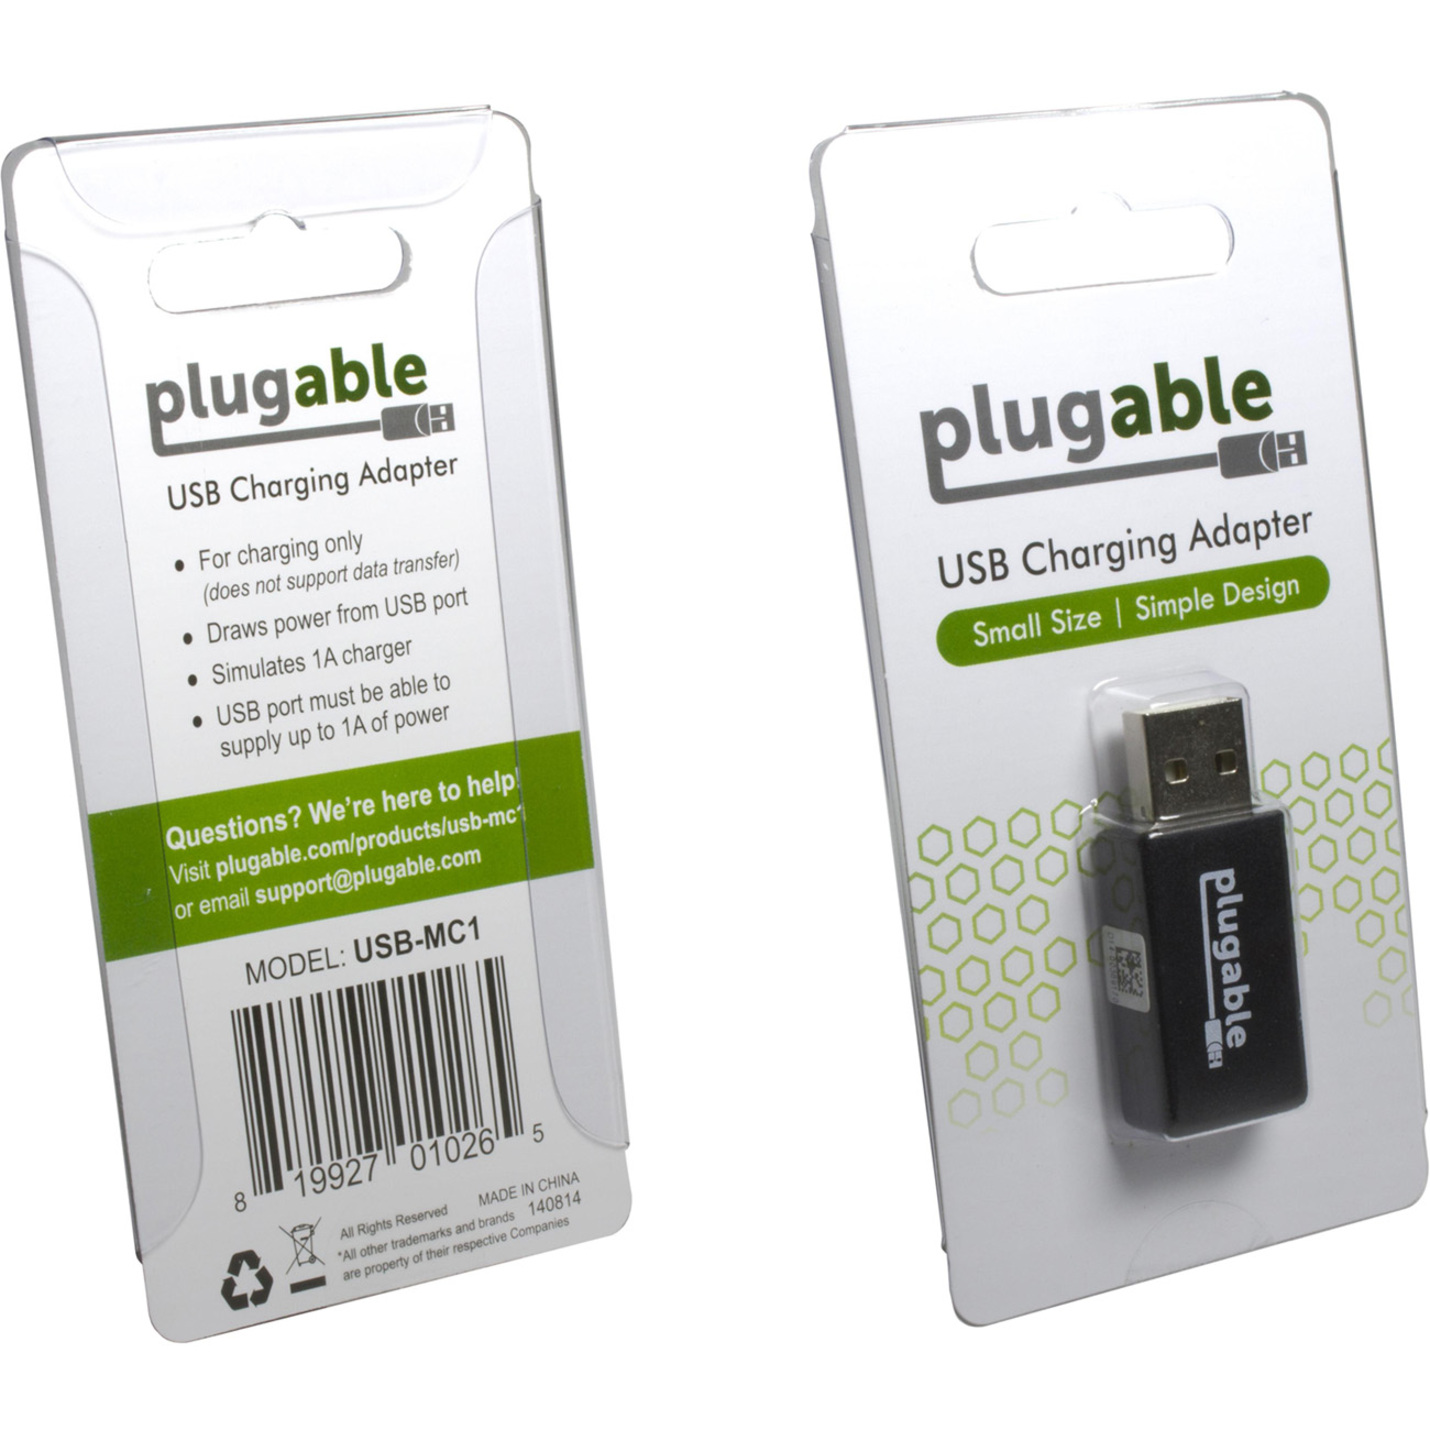 Plugable USB Universal Fast 1A Charge-Only Adapter for Android, Apple iOS, and Windows Mobile Devices - image 4 of 5